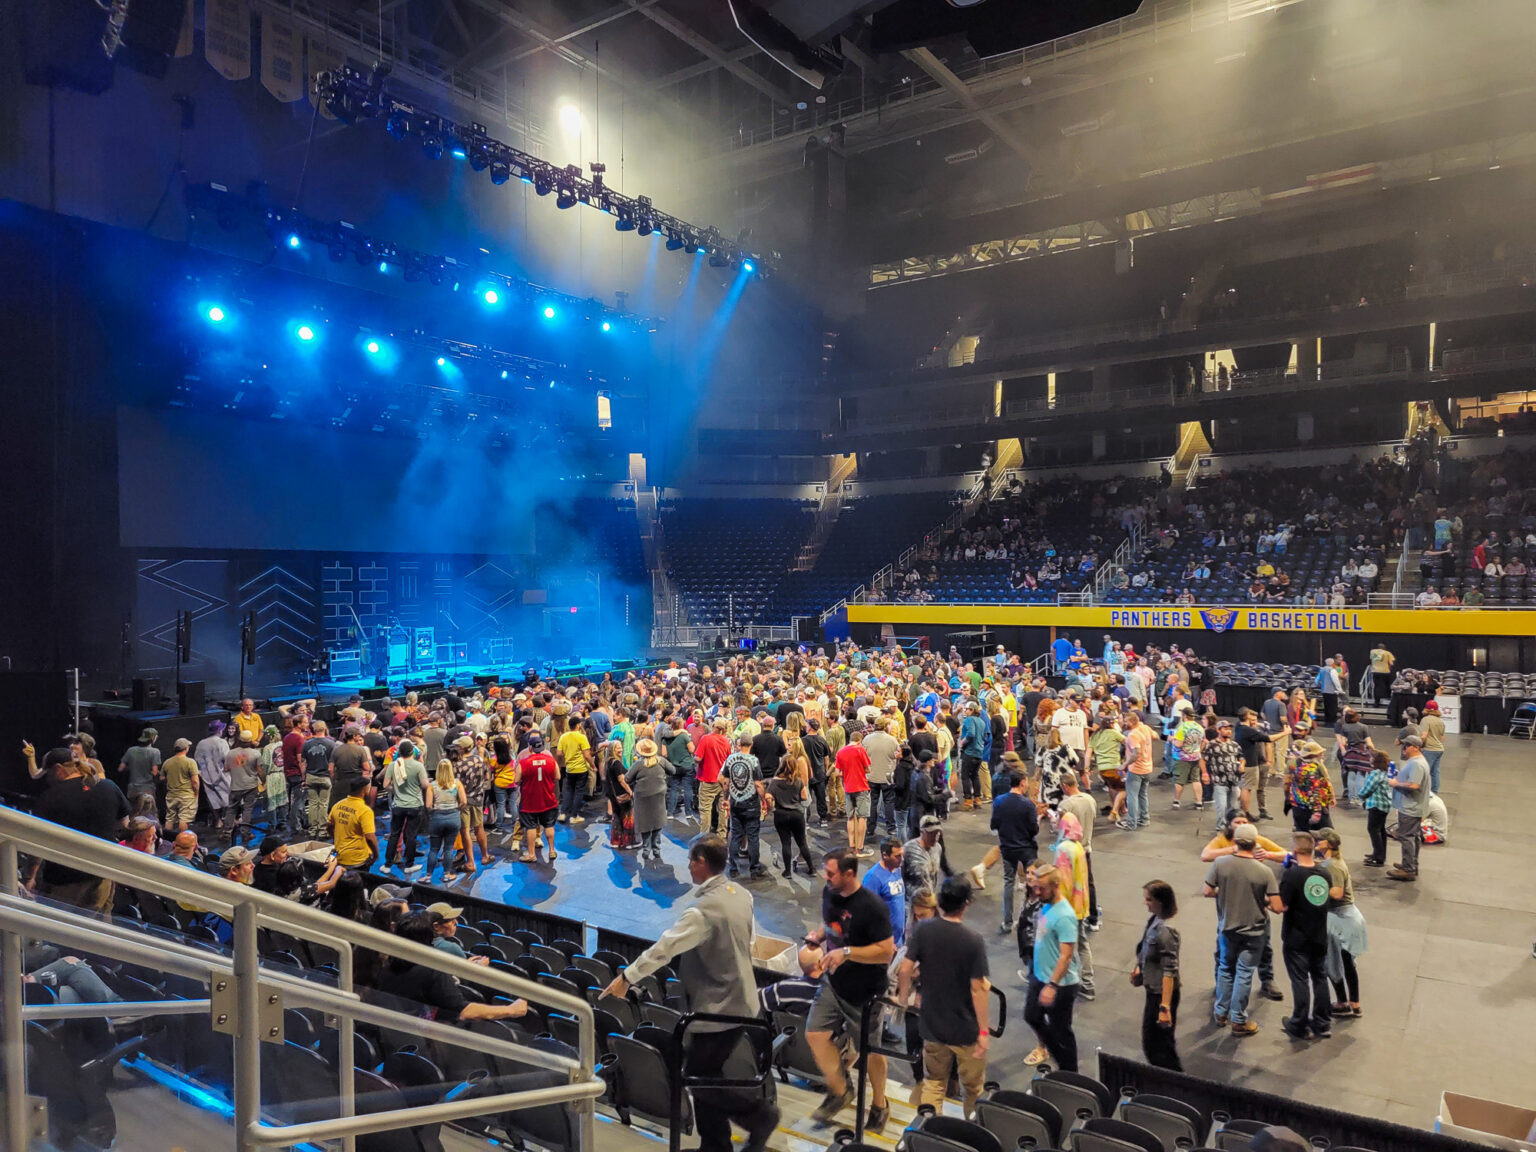 Petersen Events Center Concerts Is The Venue Worth It?